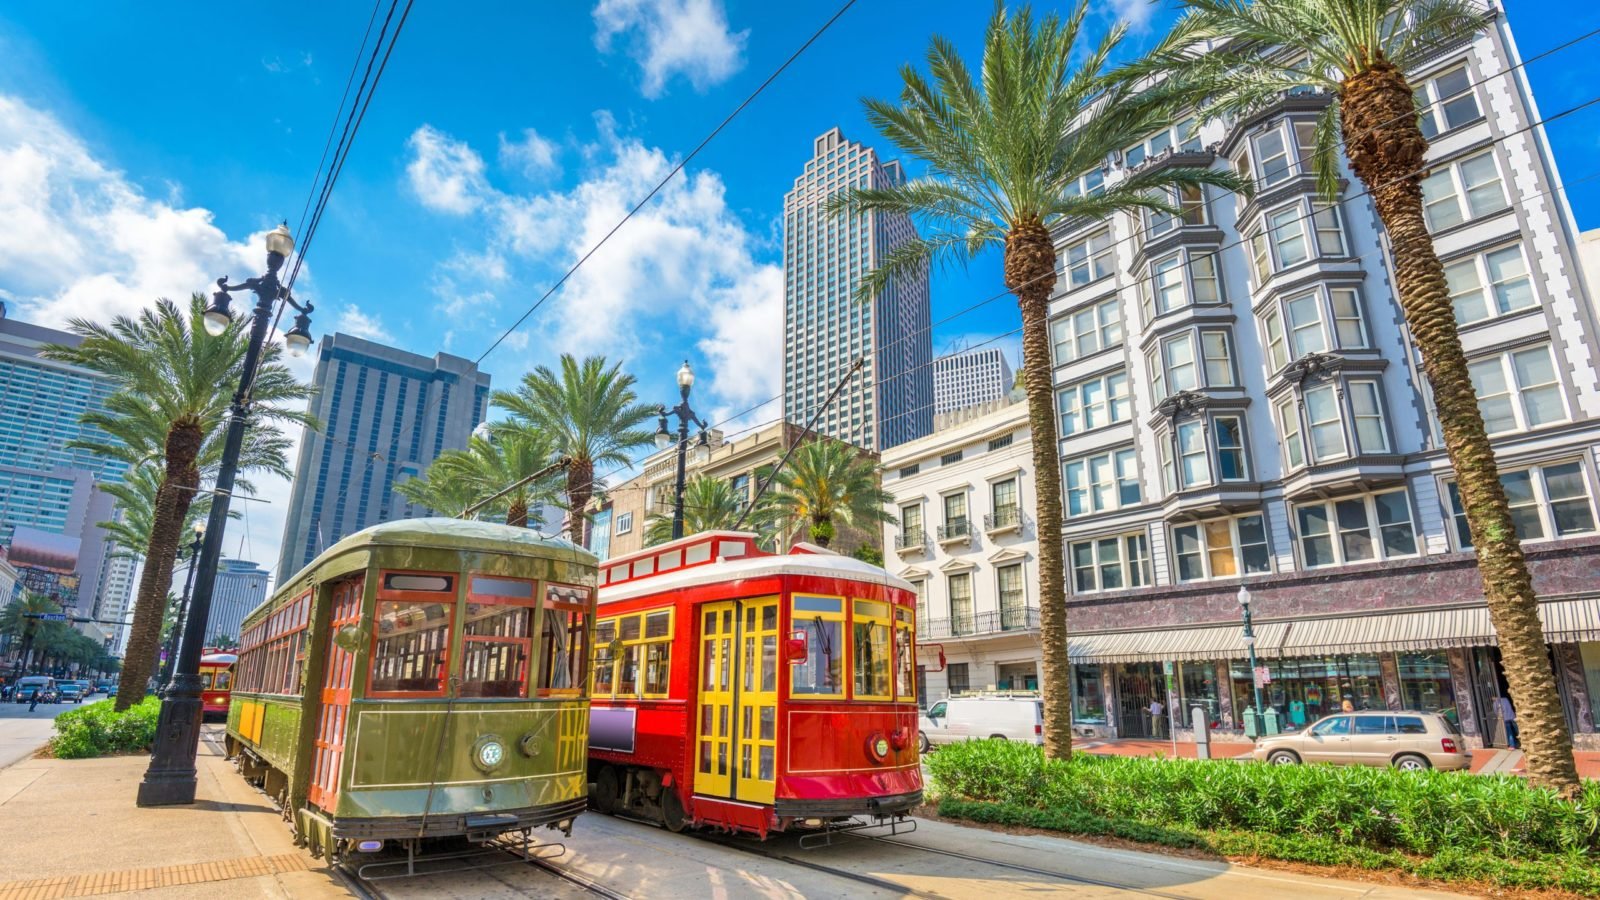 streetcars in New Orleans with the city in the background